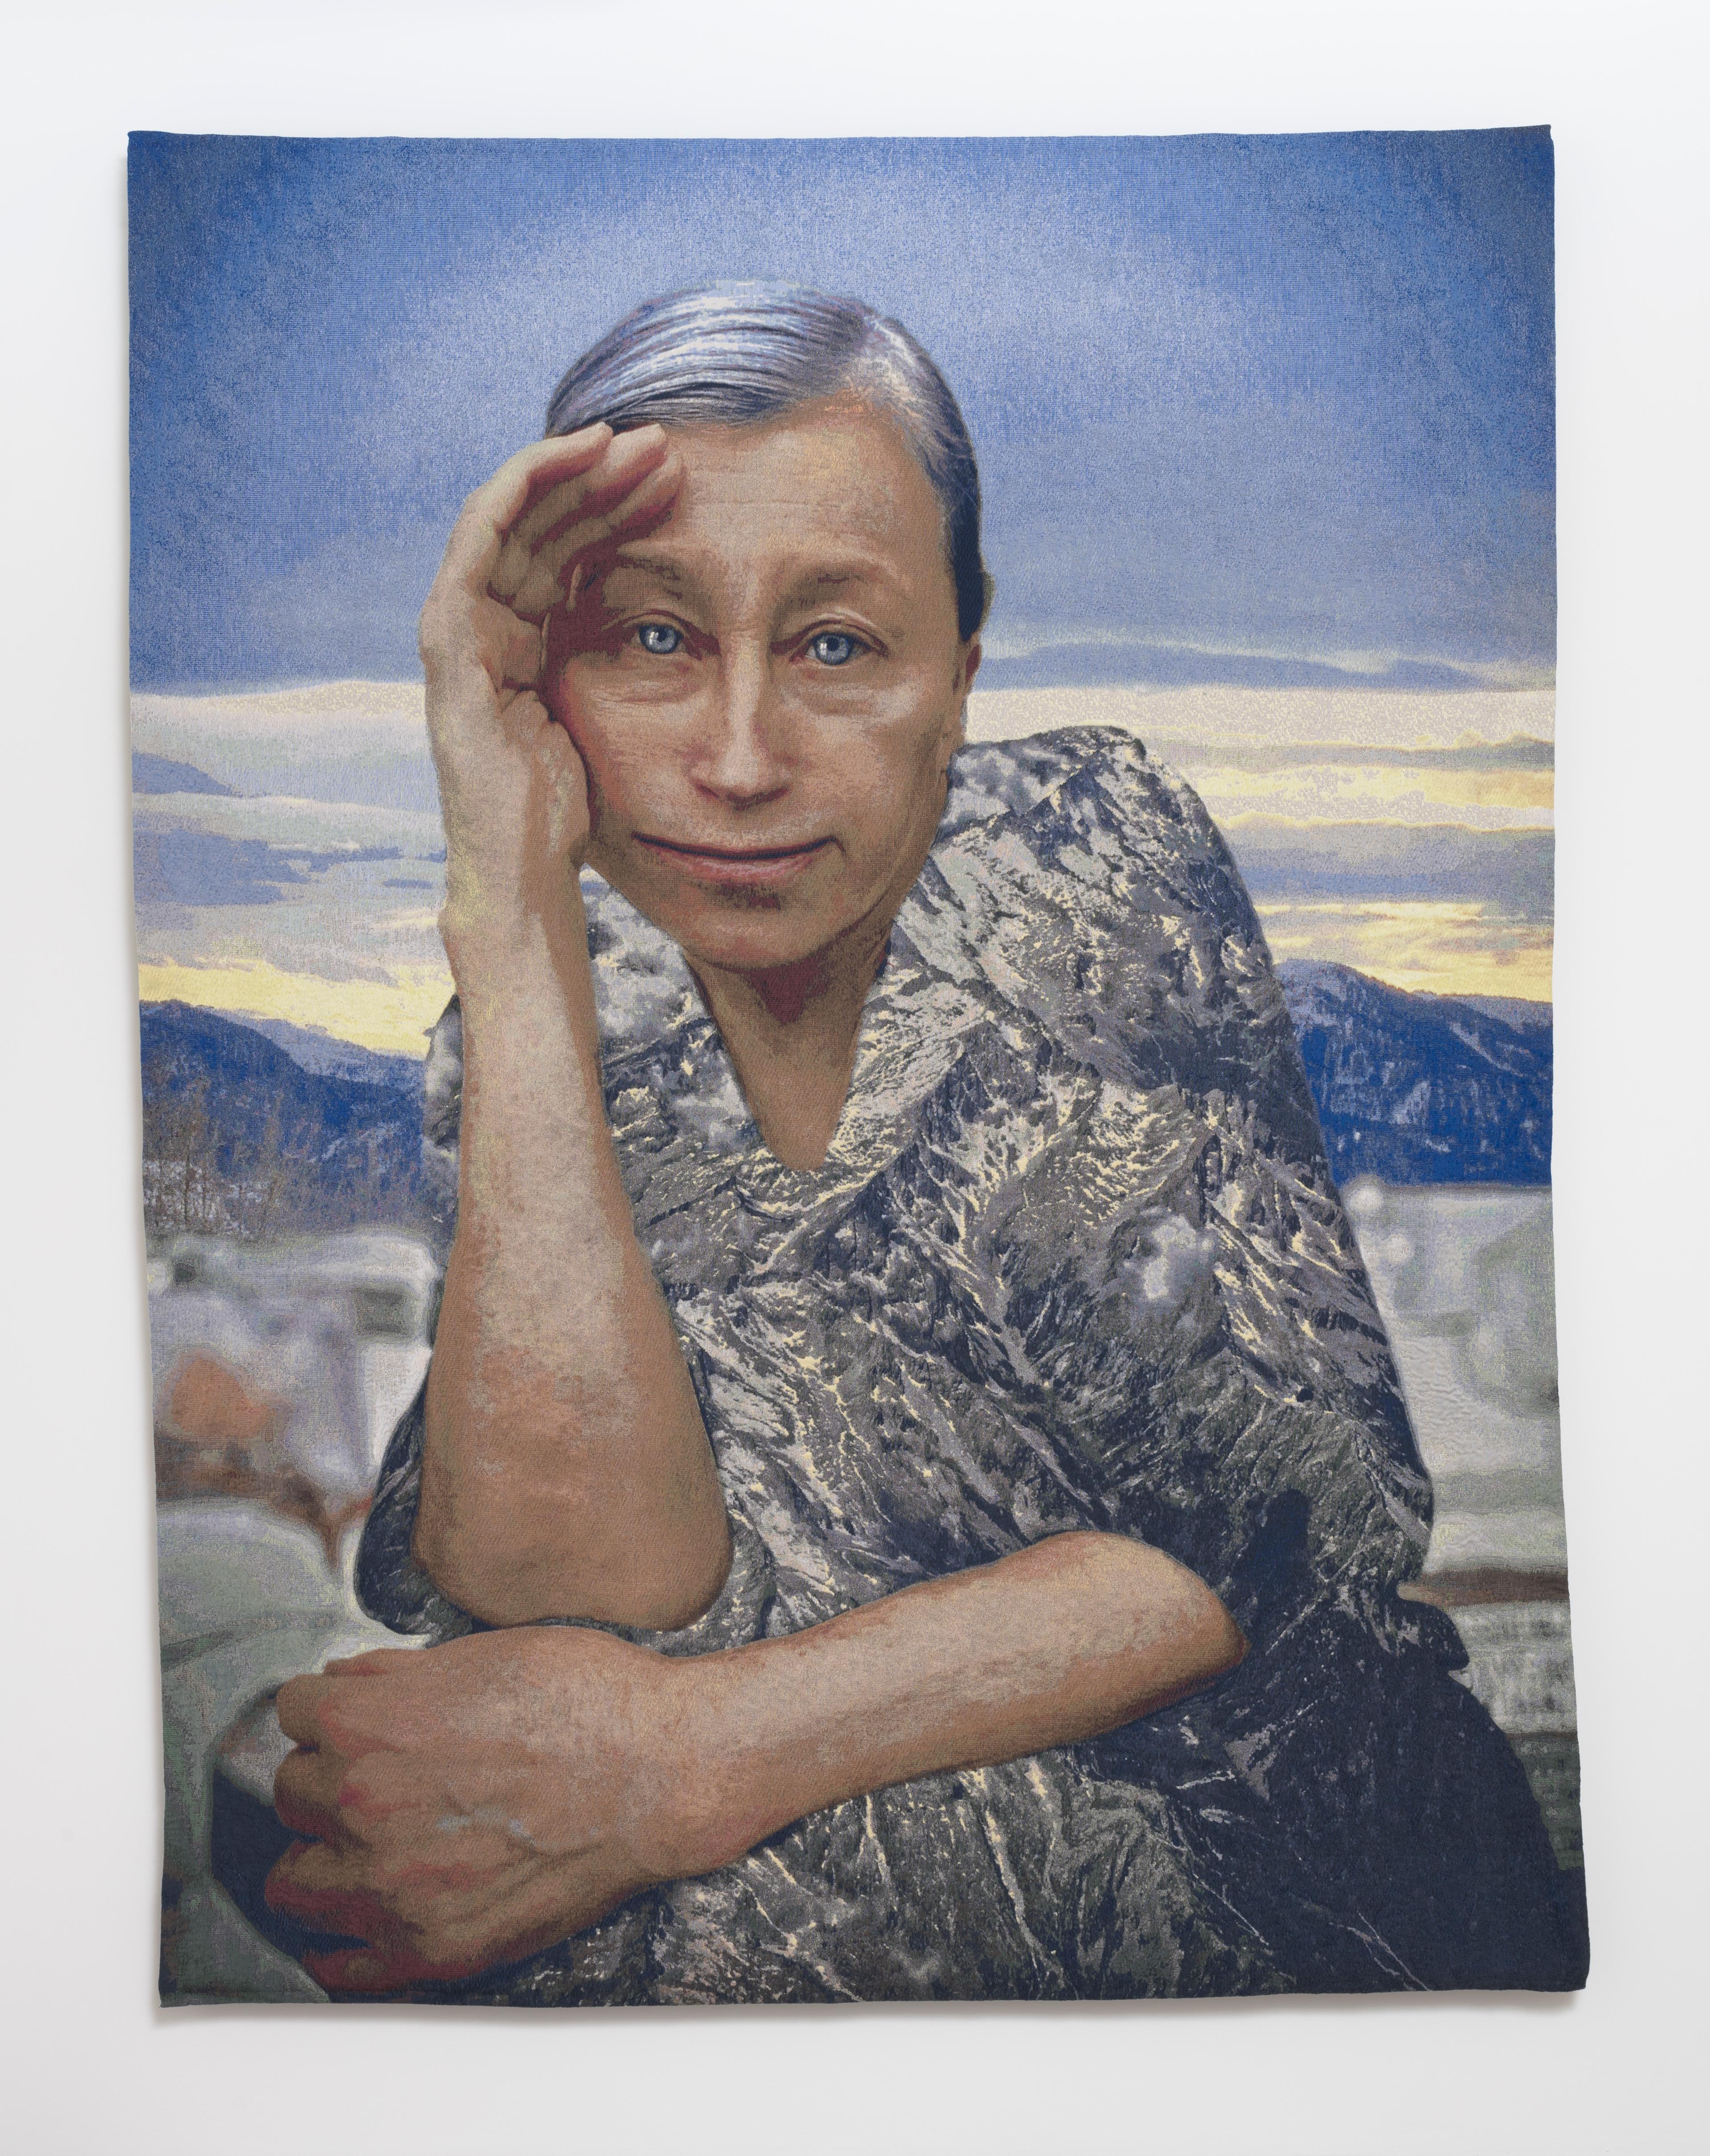 Untitled 2021 © Cindy Sherman. Courtesy the artist, Sprüth Magers and Hauser & Wirth